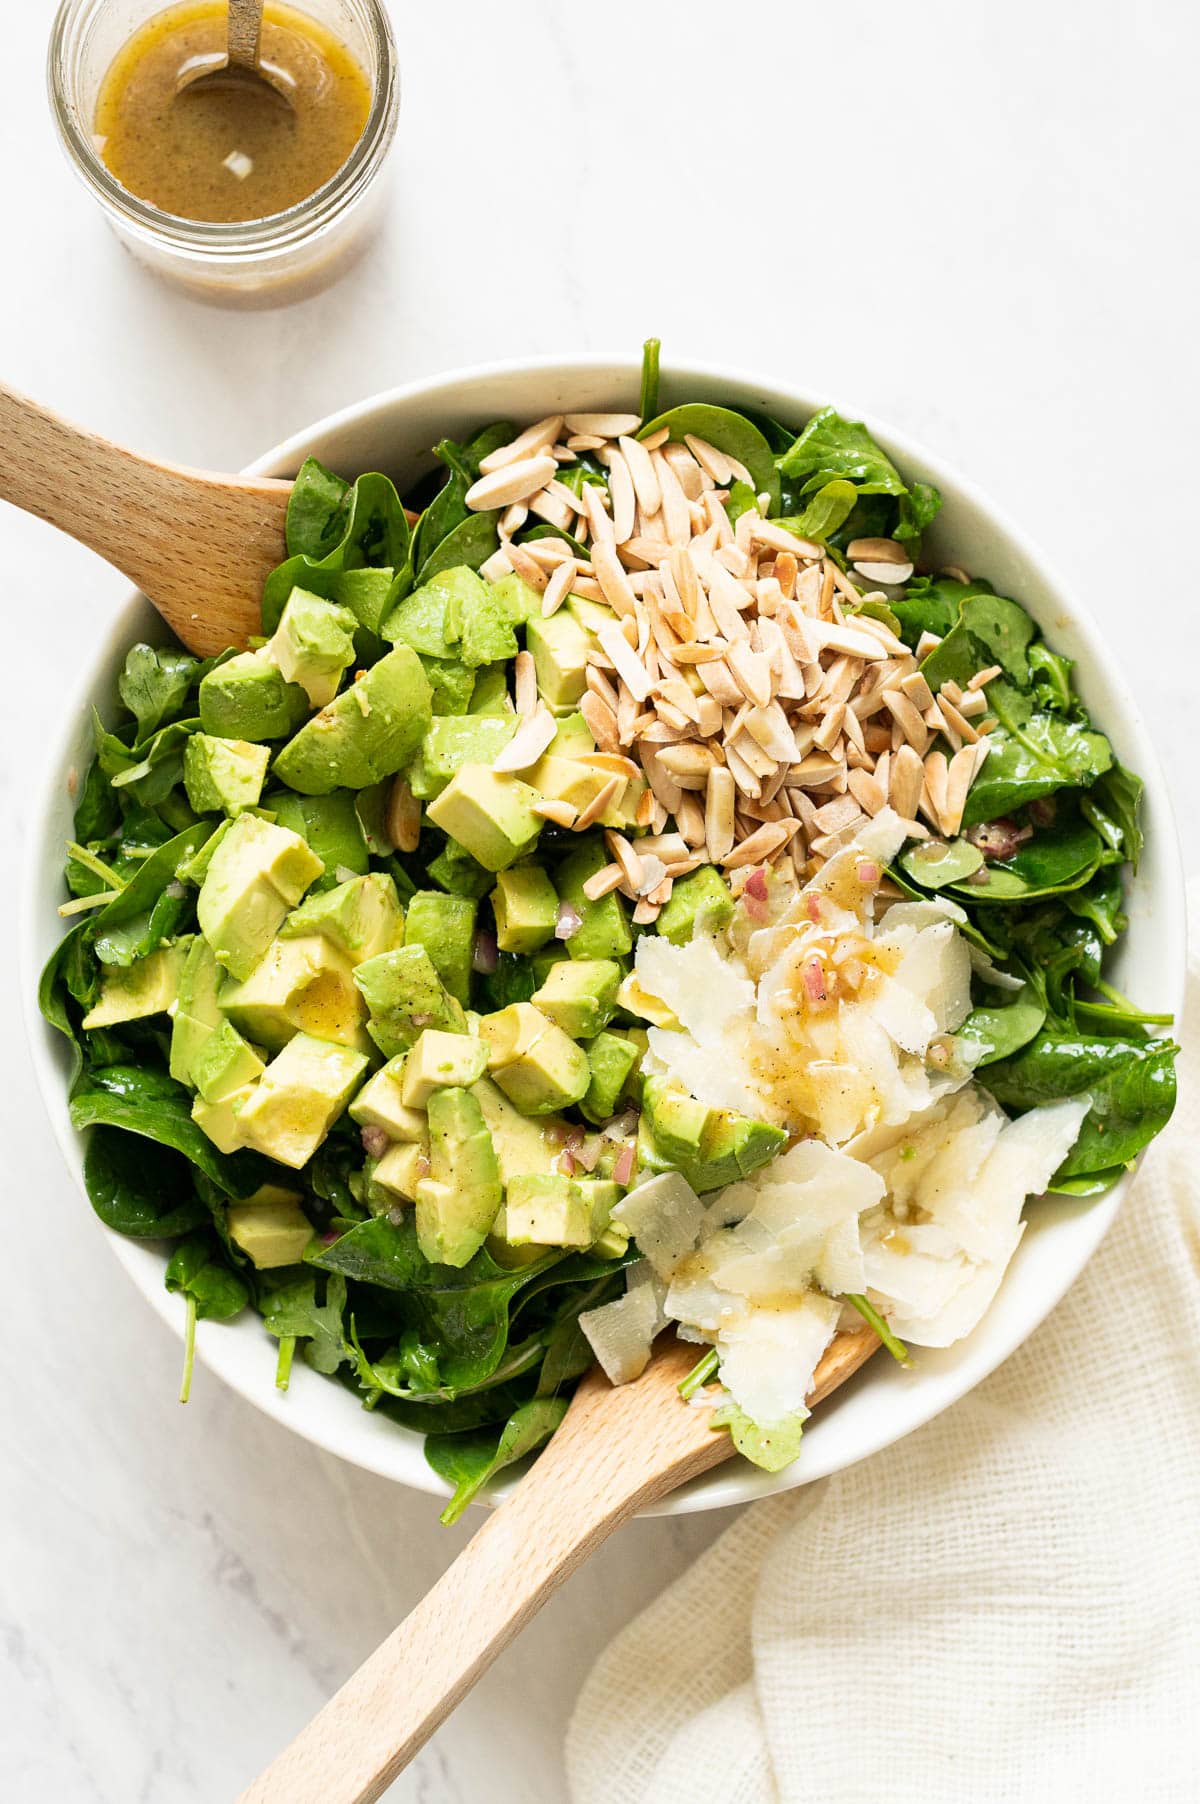 Spinach avocados salad drizzled with dressing in white bowl with tongs.